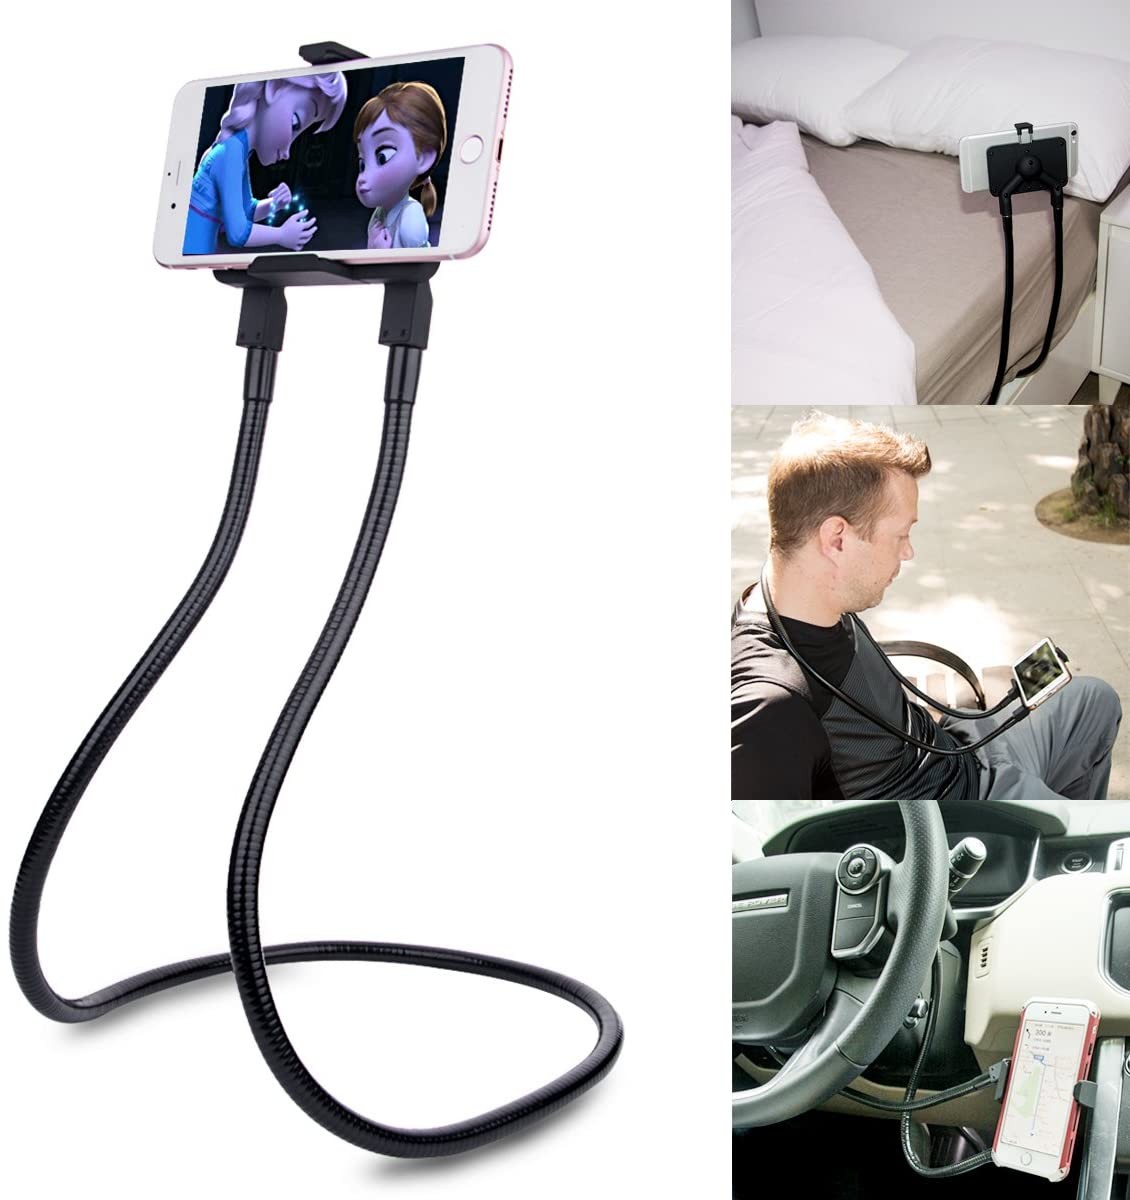 B-Land Cell Phone Holder, Universal Mobile Phone Stand, Lazy Bracket, DIY Flexible Mount Stand